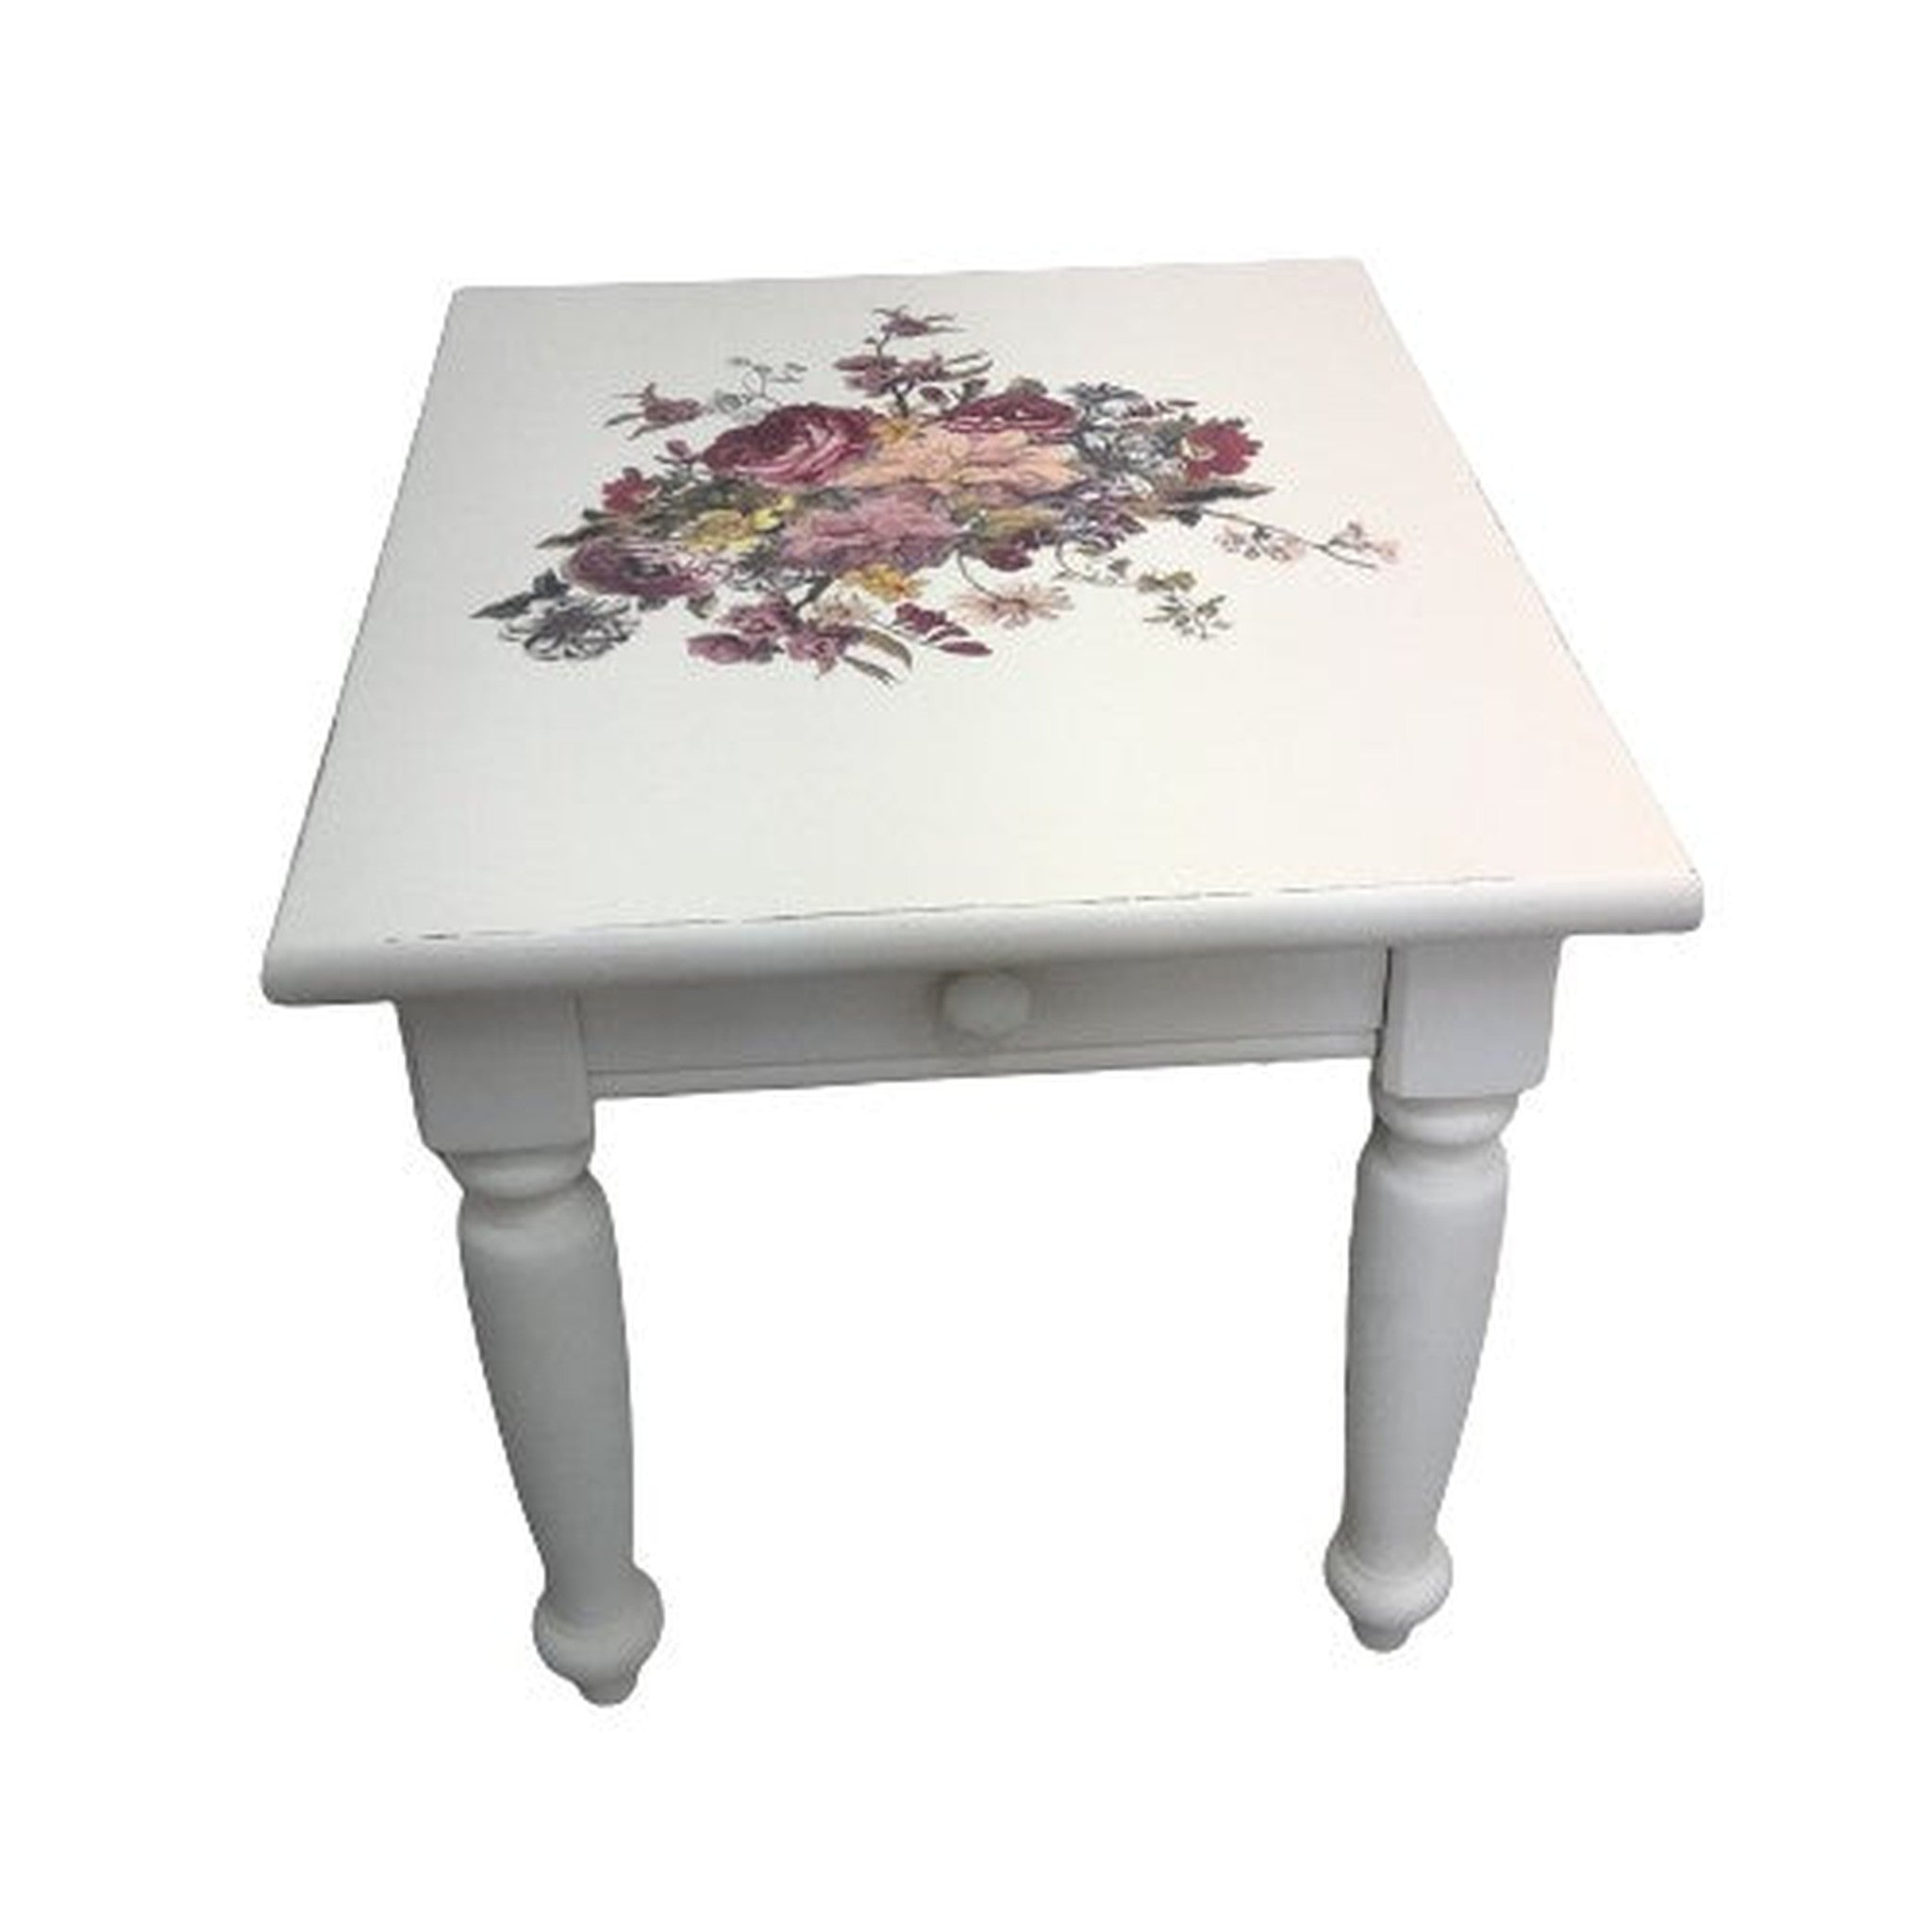 Repurpose for a Purpose Floral End Table